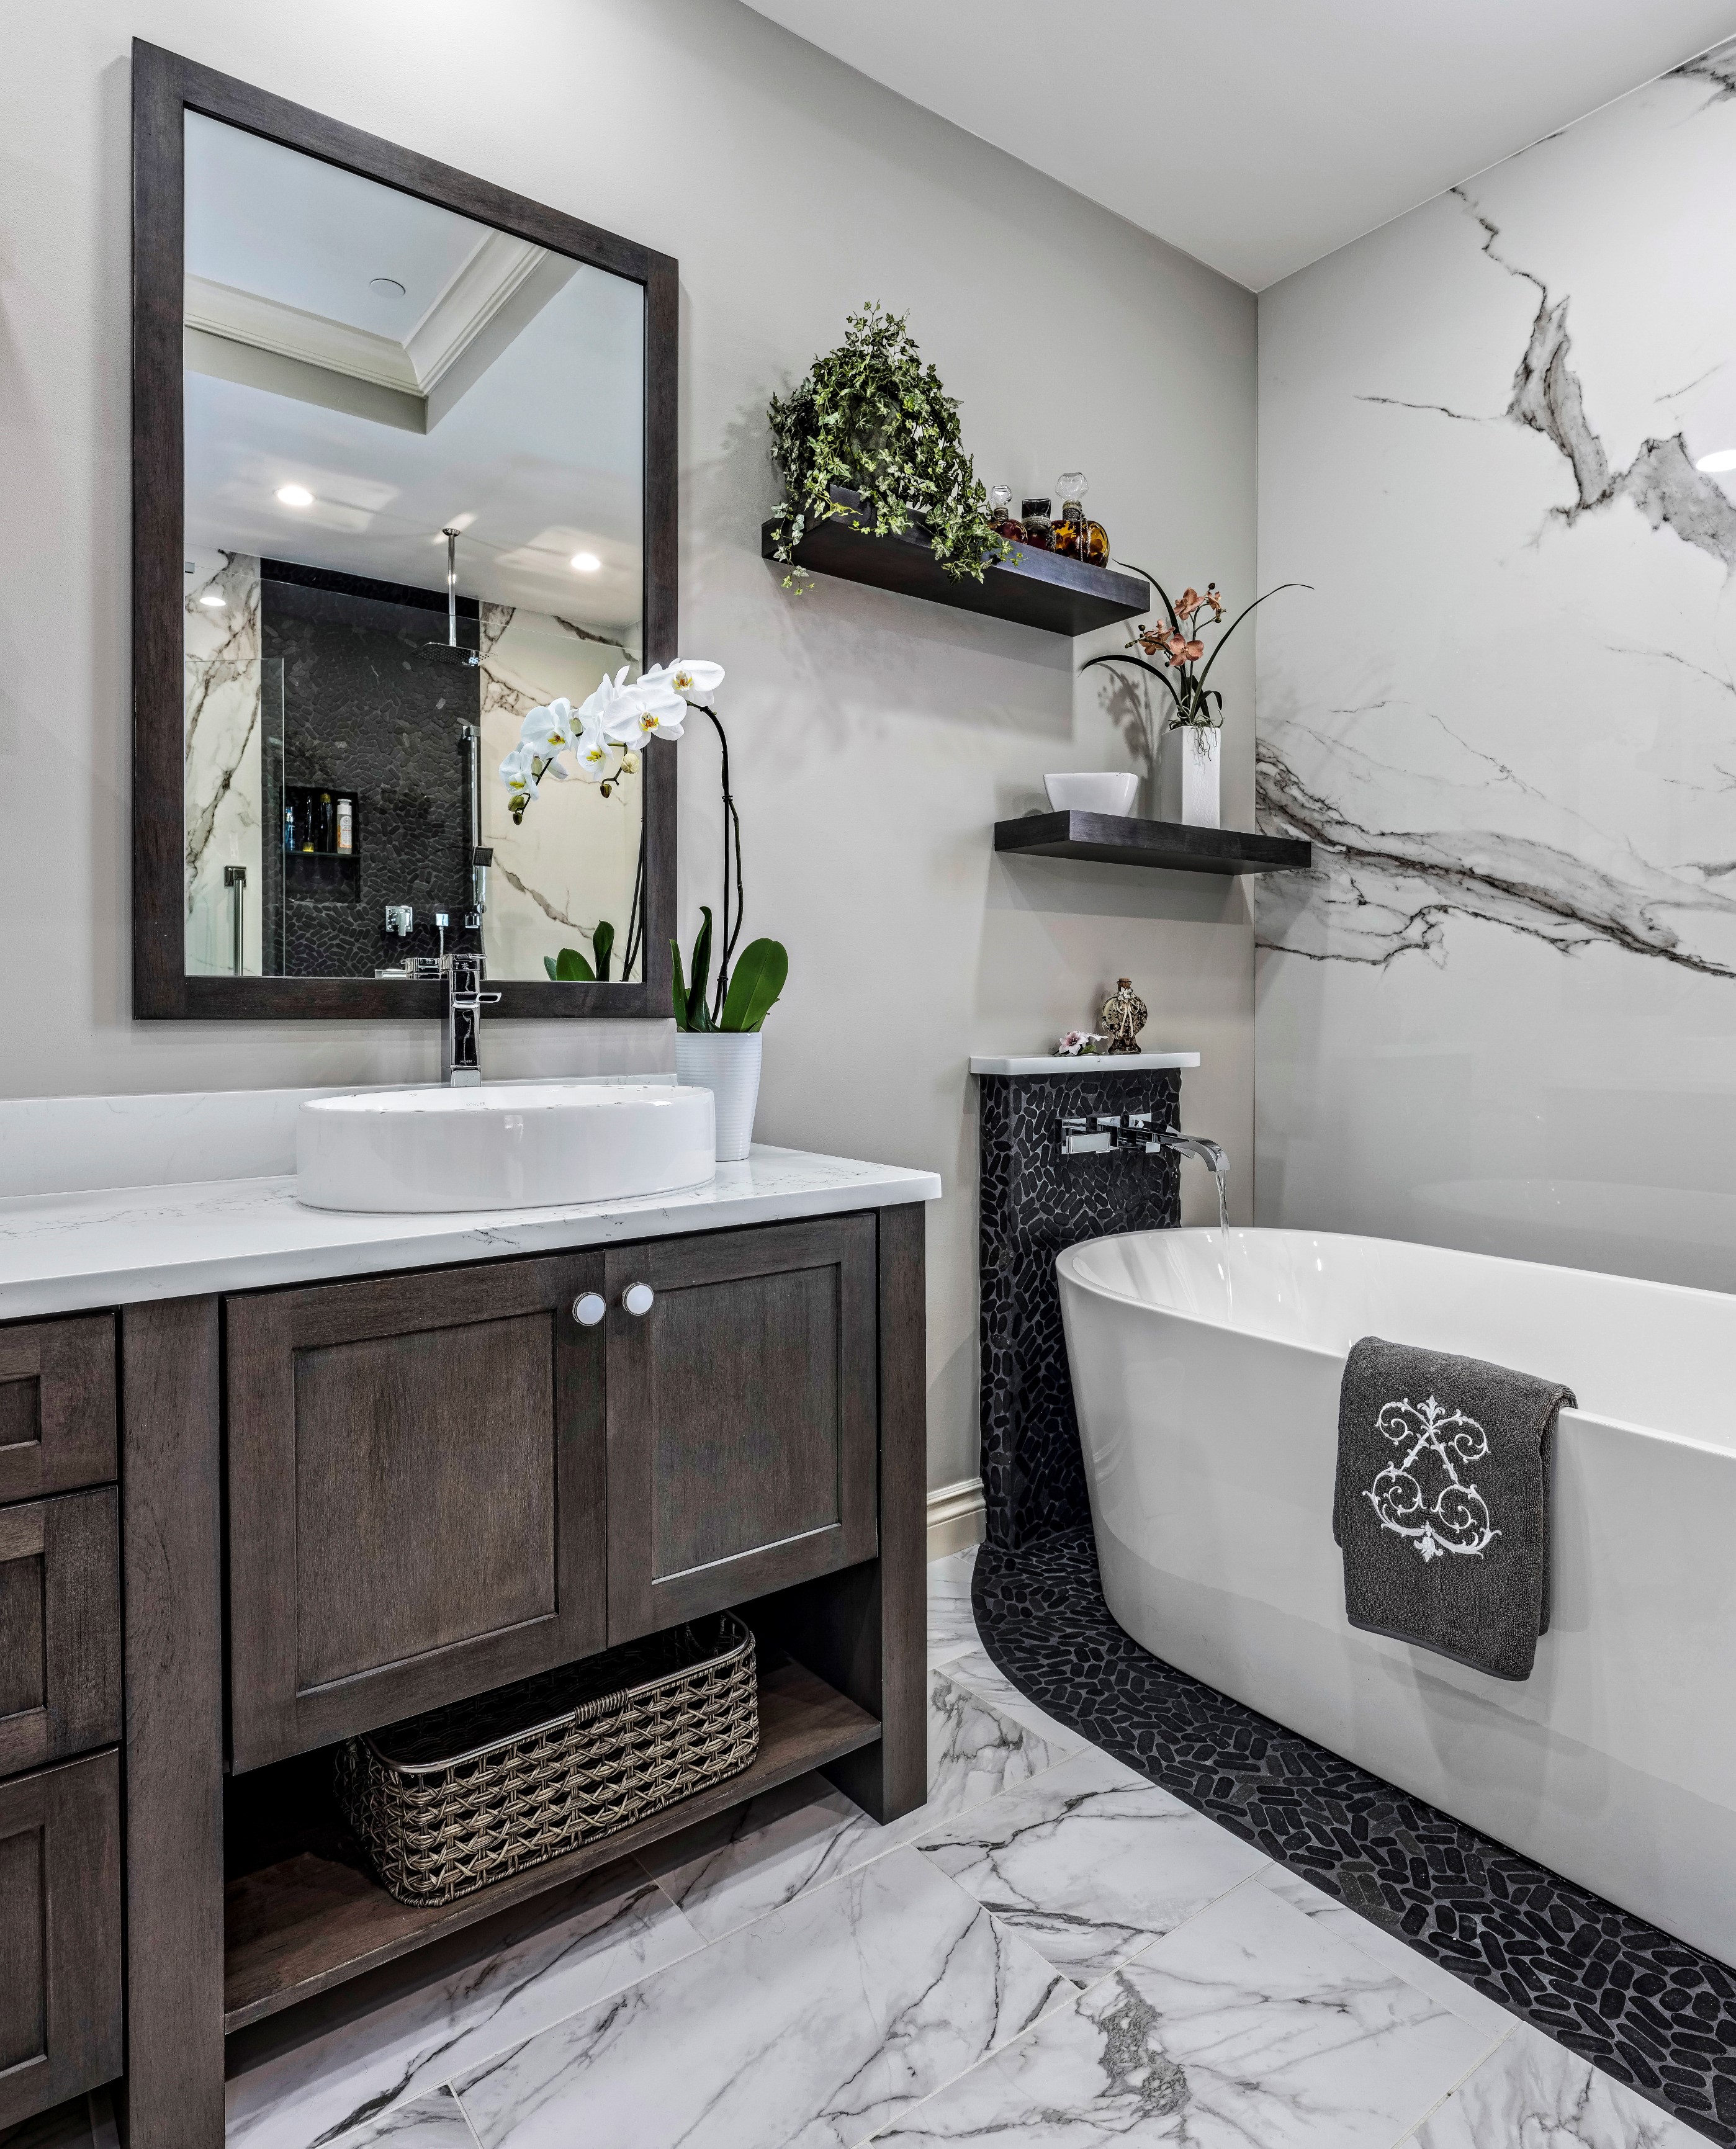 Bathroom Remodeling Typically Cost, How Much Does It Cost To Renovate A Bathroom